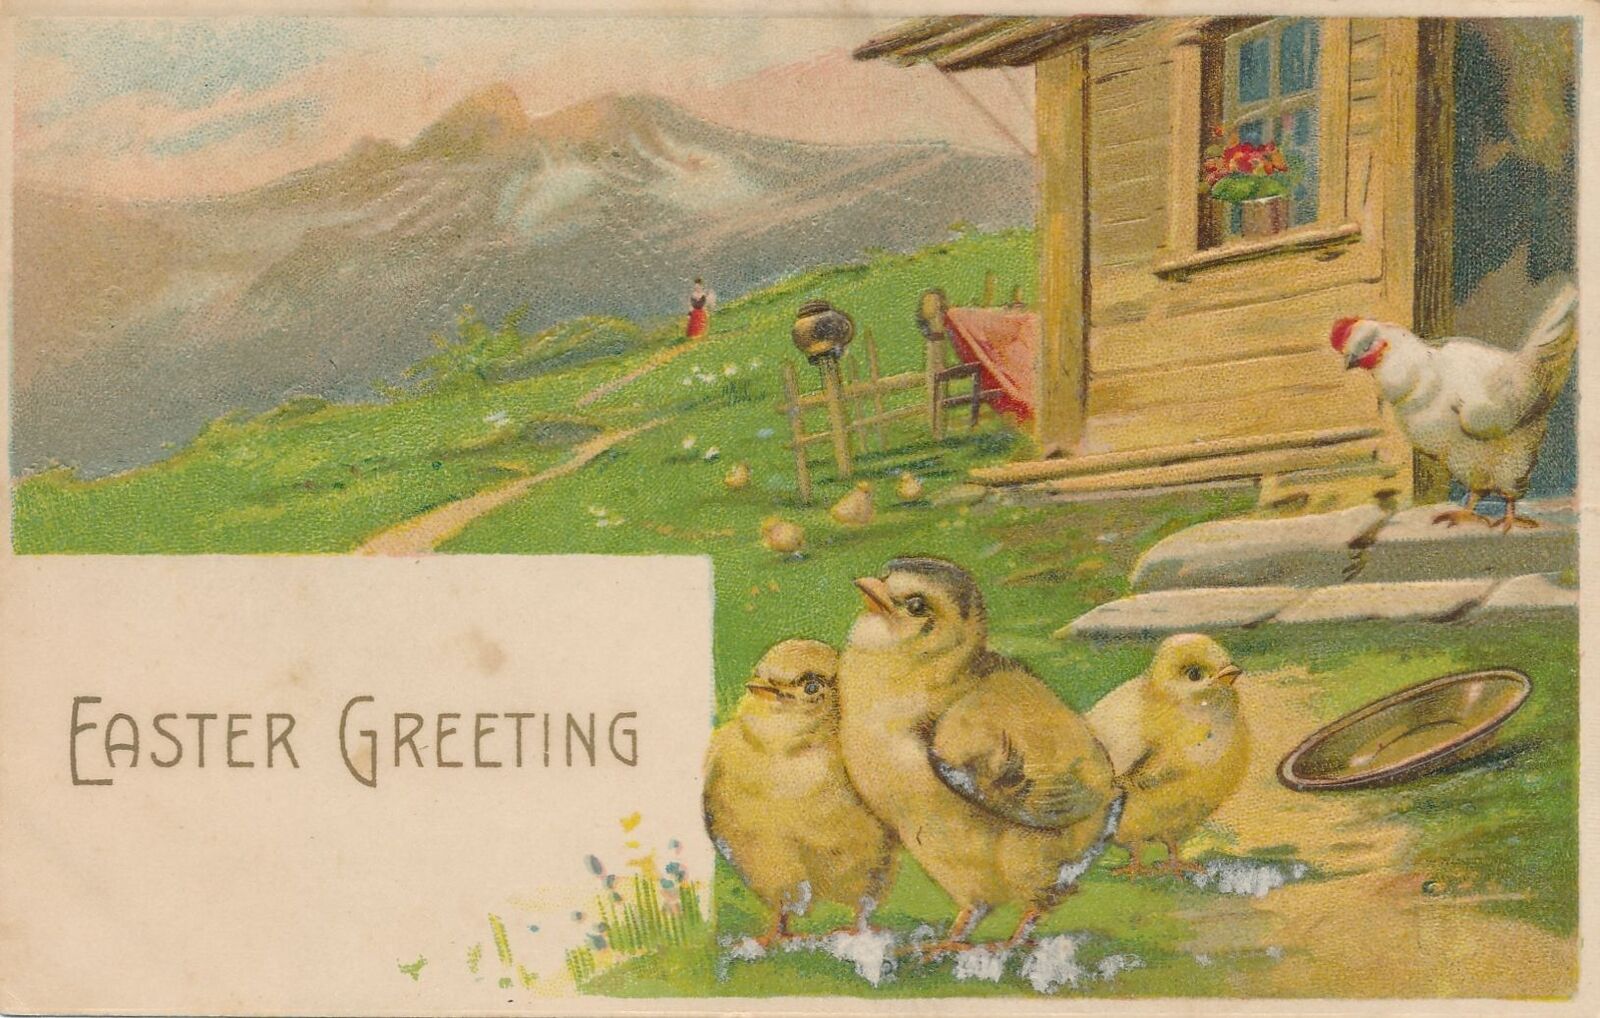 EASTER - Chicks and Chicken Near House Easter Greeting Postcard